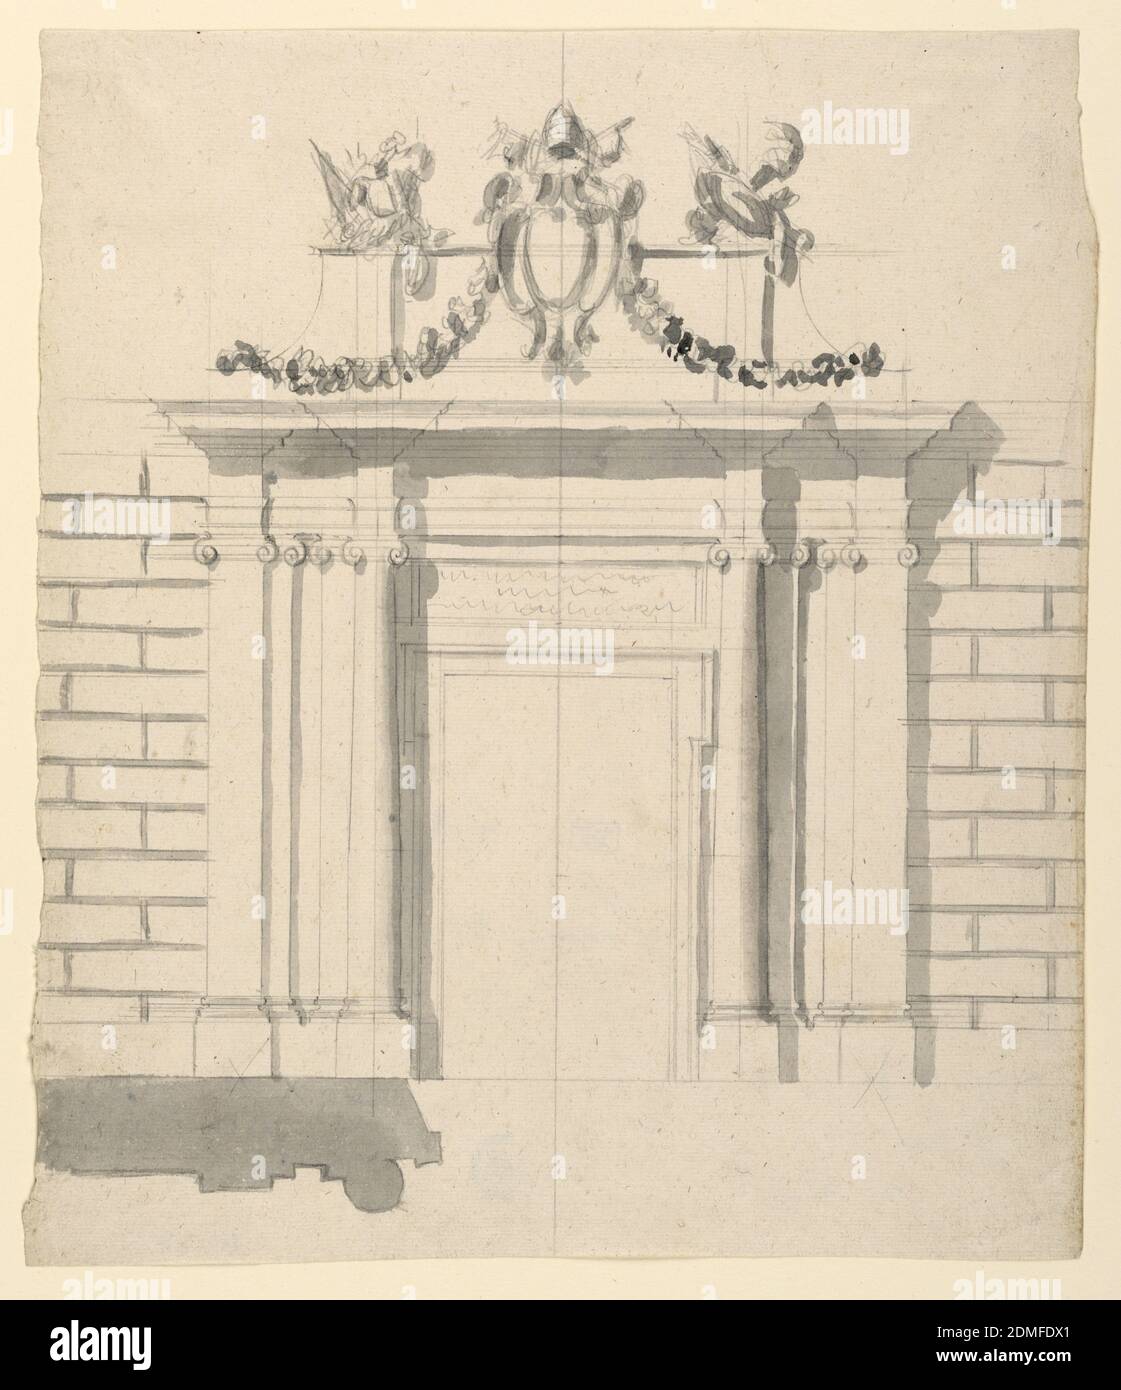 City Gate, Graphite, gray wash Support: laid paper, Rome, Italy, Italy, 1775, architecture, Drawing Stock Photo